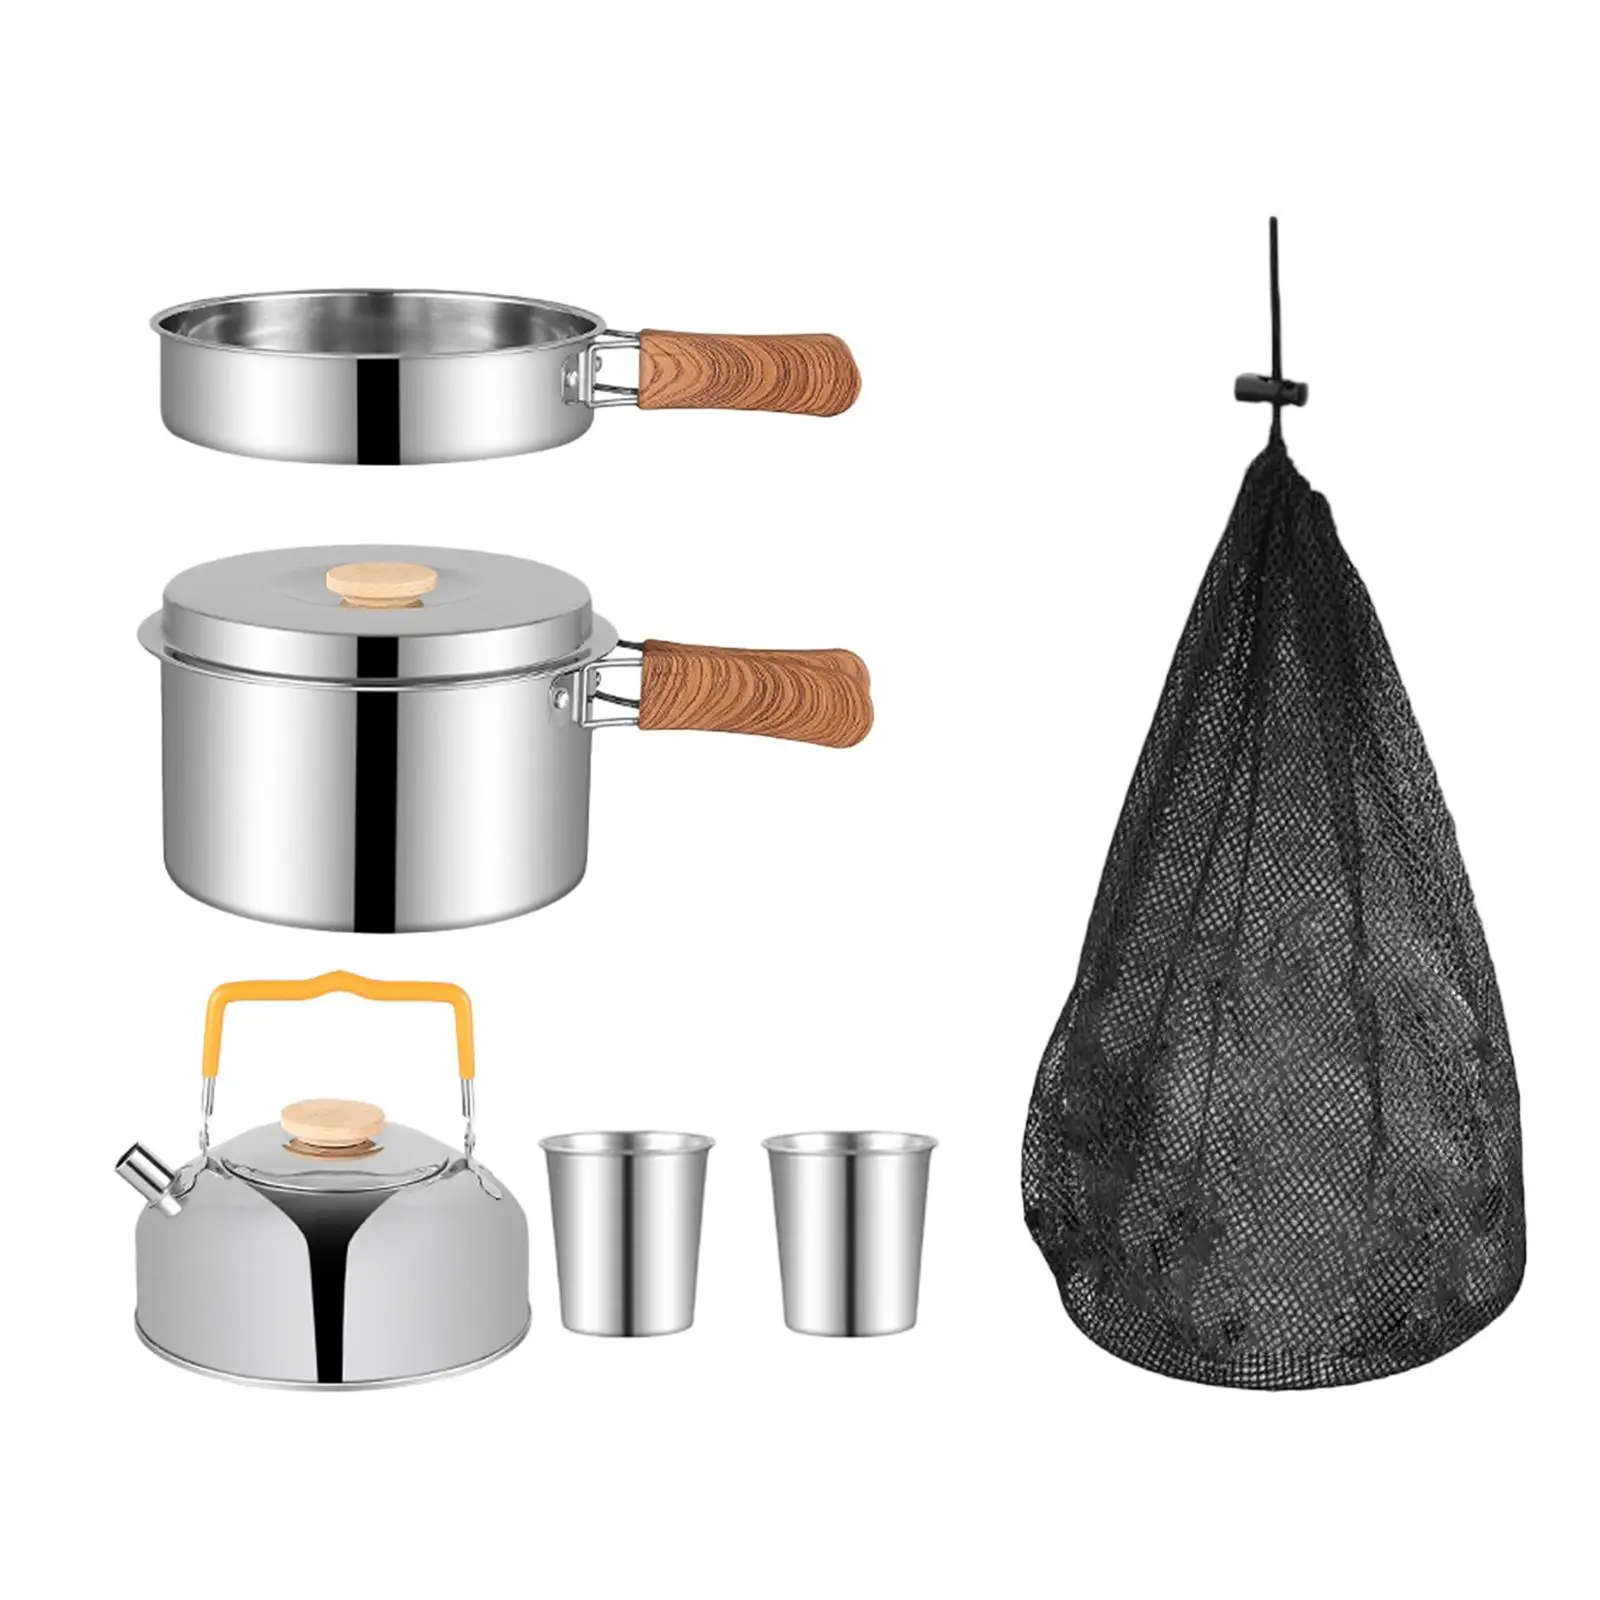 5 Pieces Camping Cookware Set Outdoor Cook Gear Kitchenware Folding Handle Camping Pot Pan and Kettle for Home Mountaineering